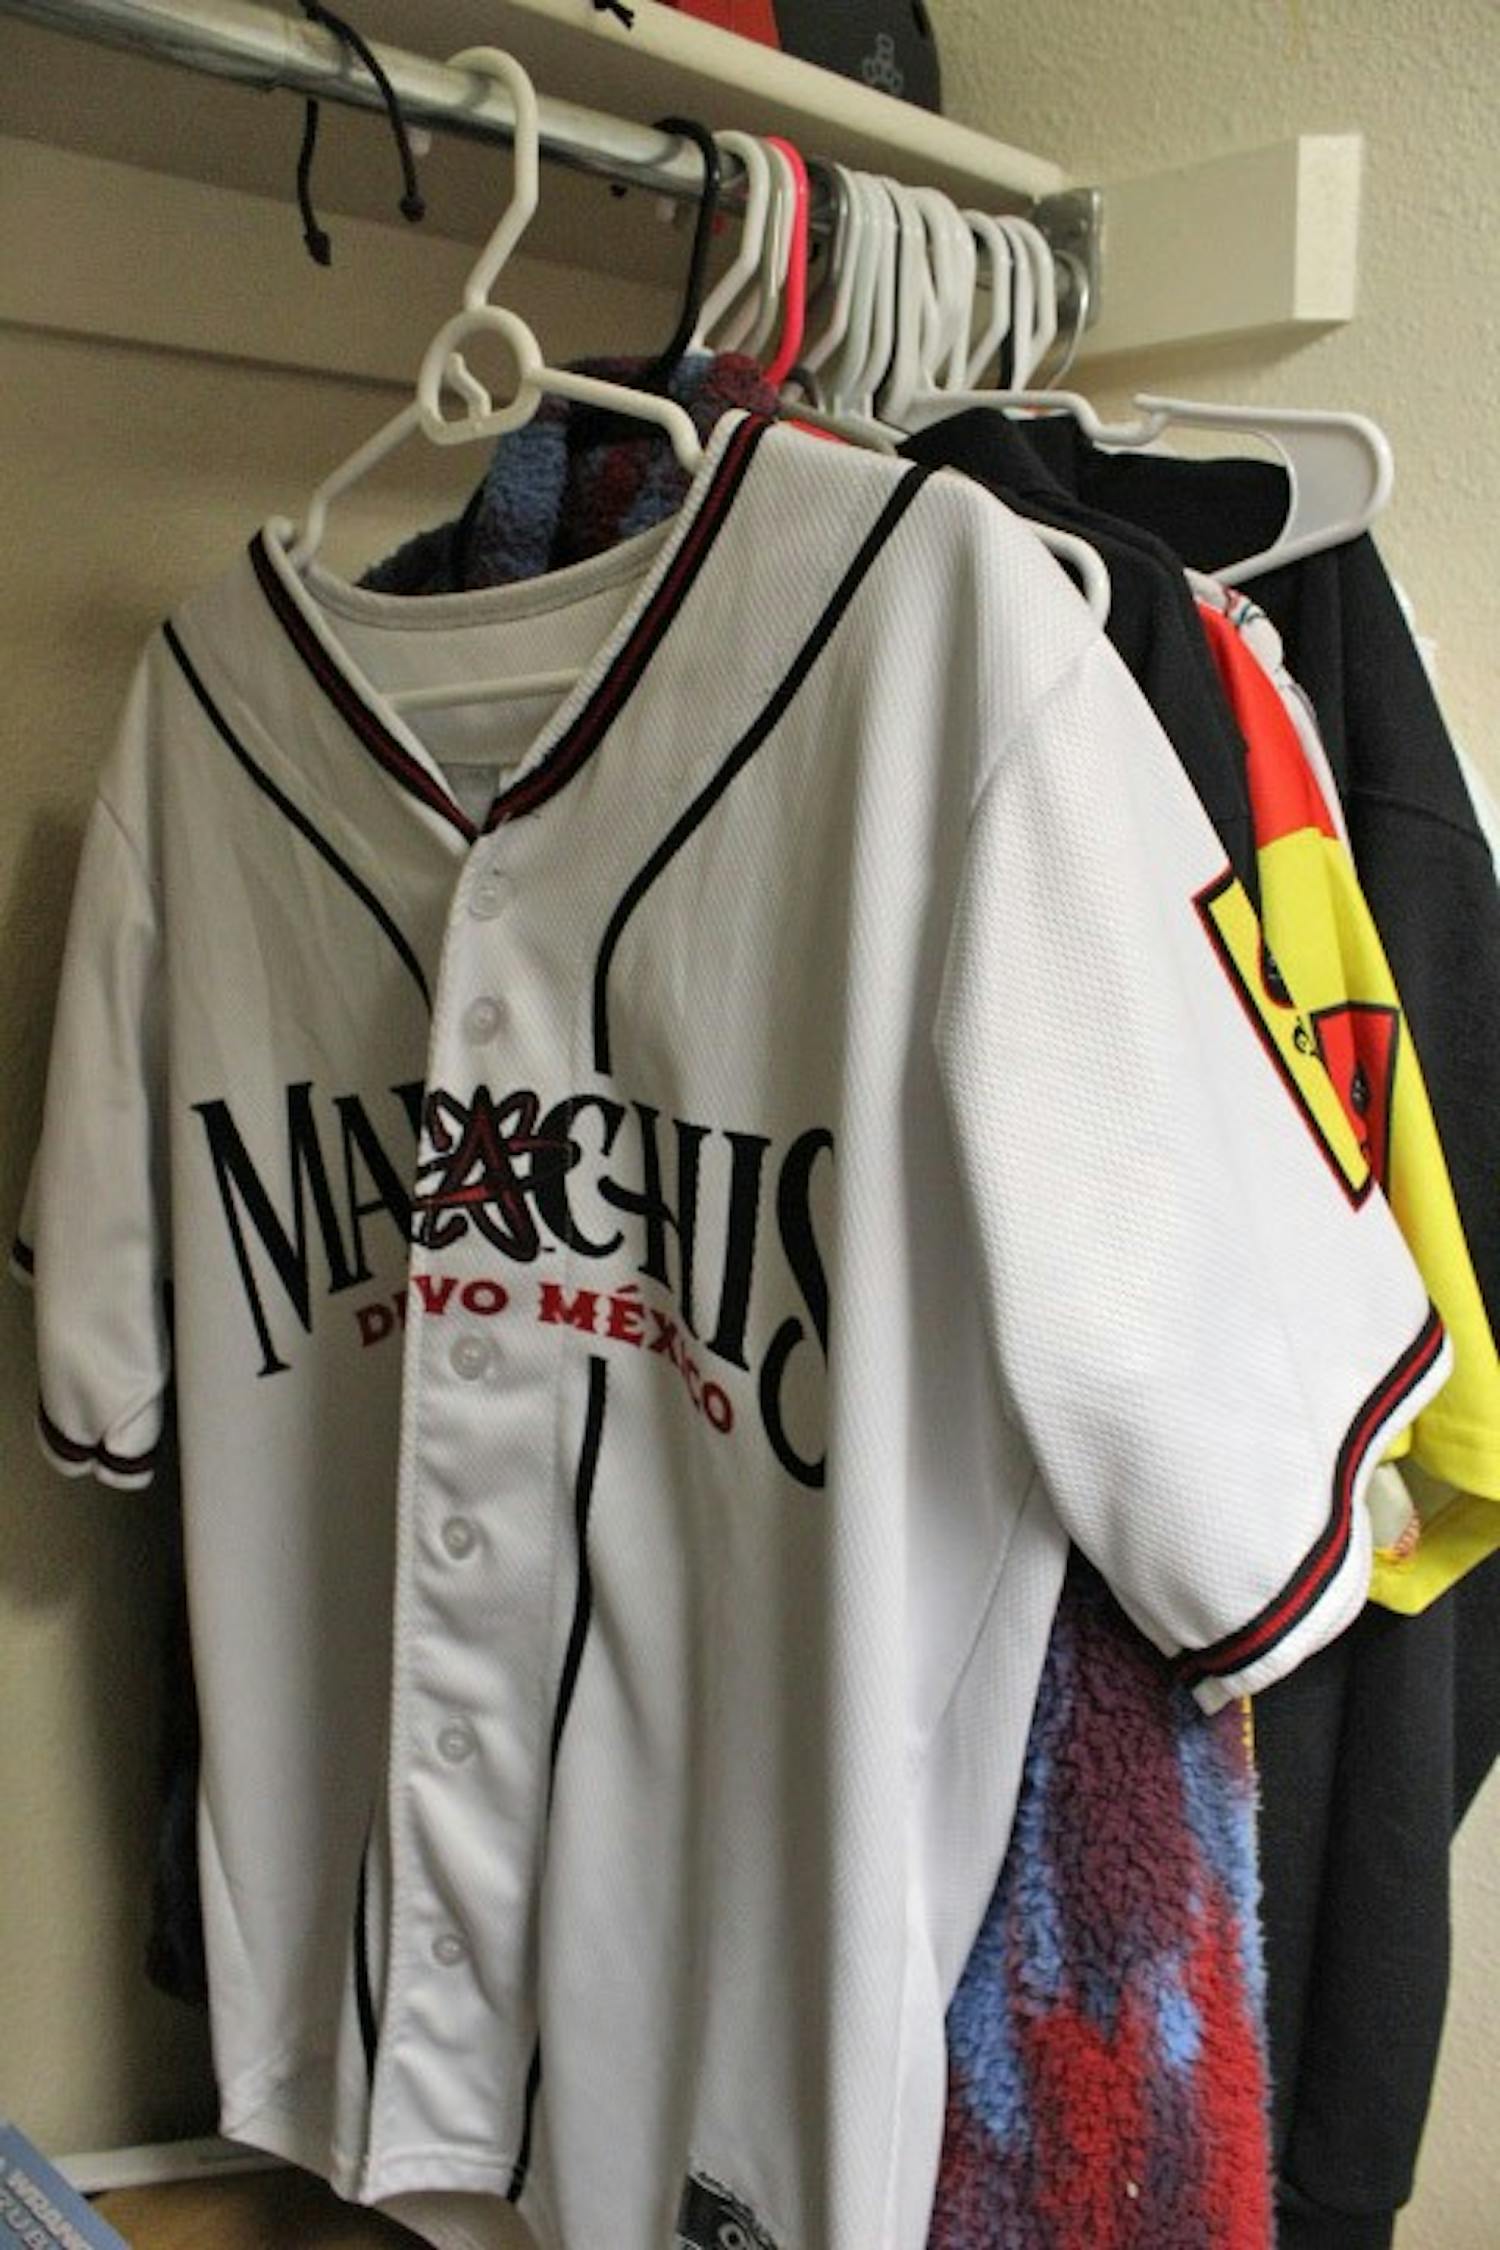 Hit or miss: Isotopes jersey review - The Daily Lobo